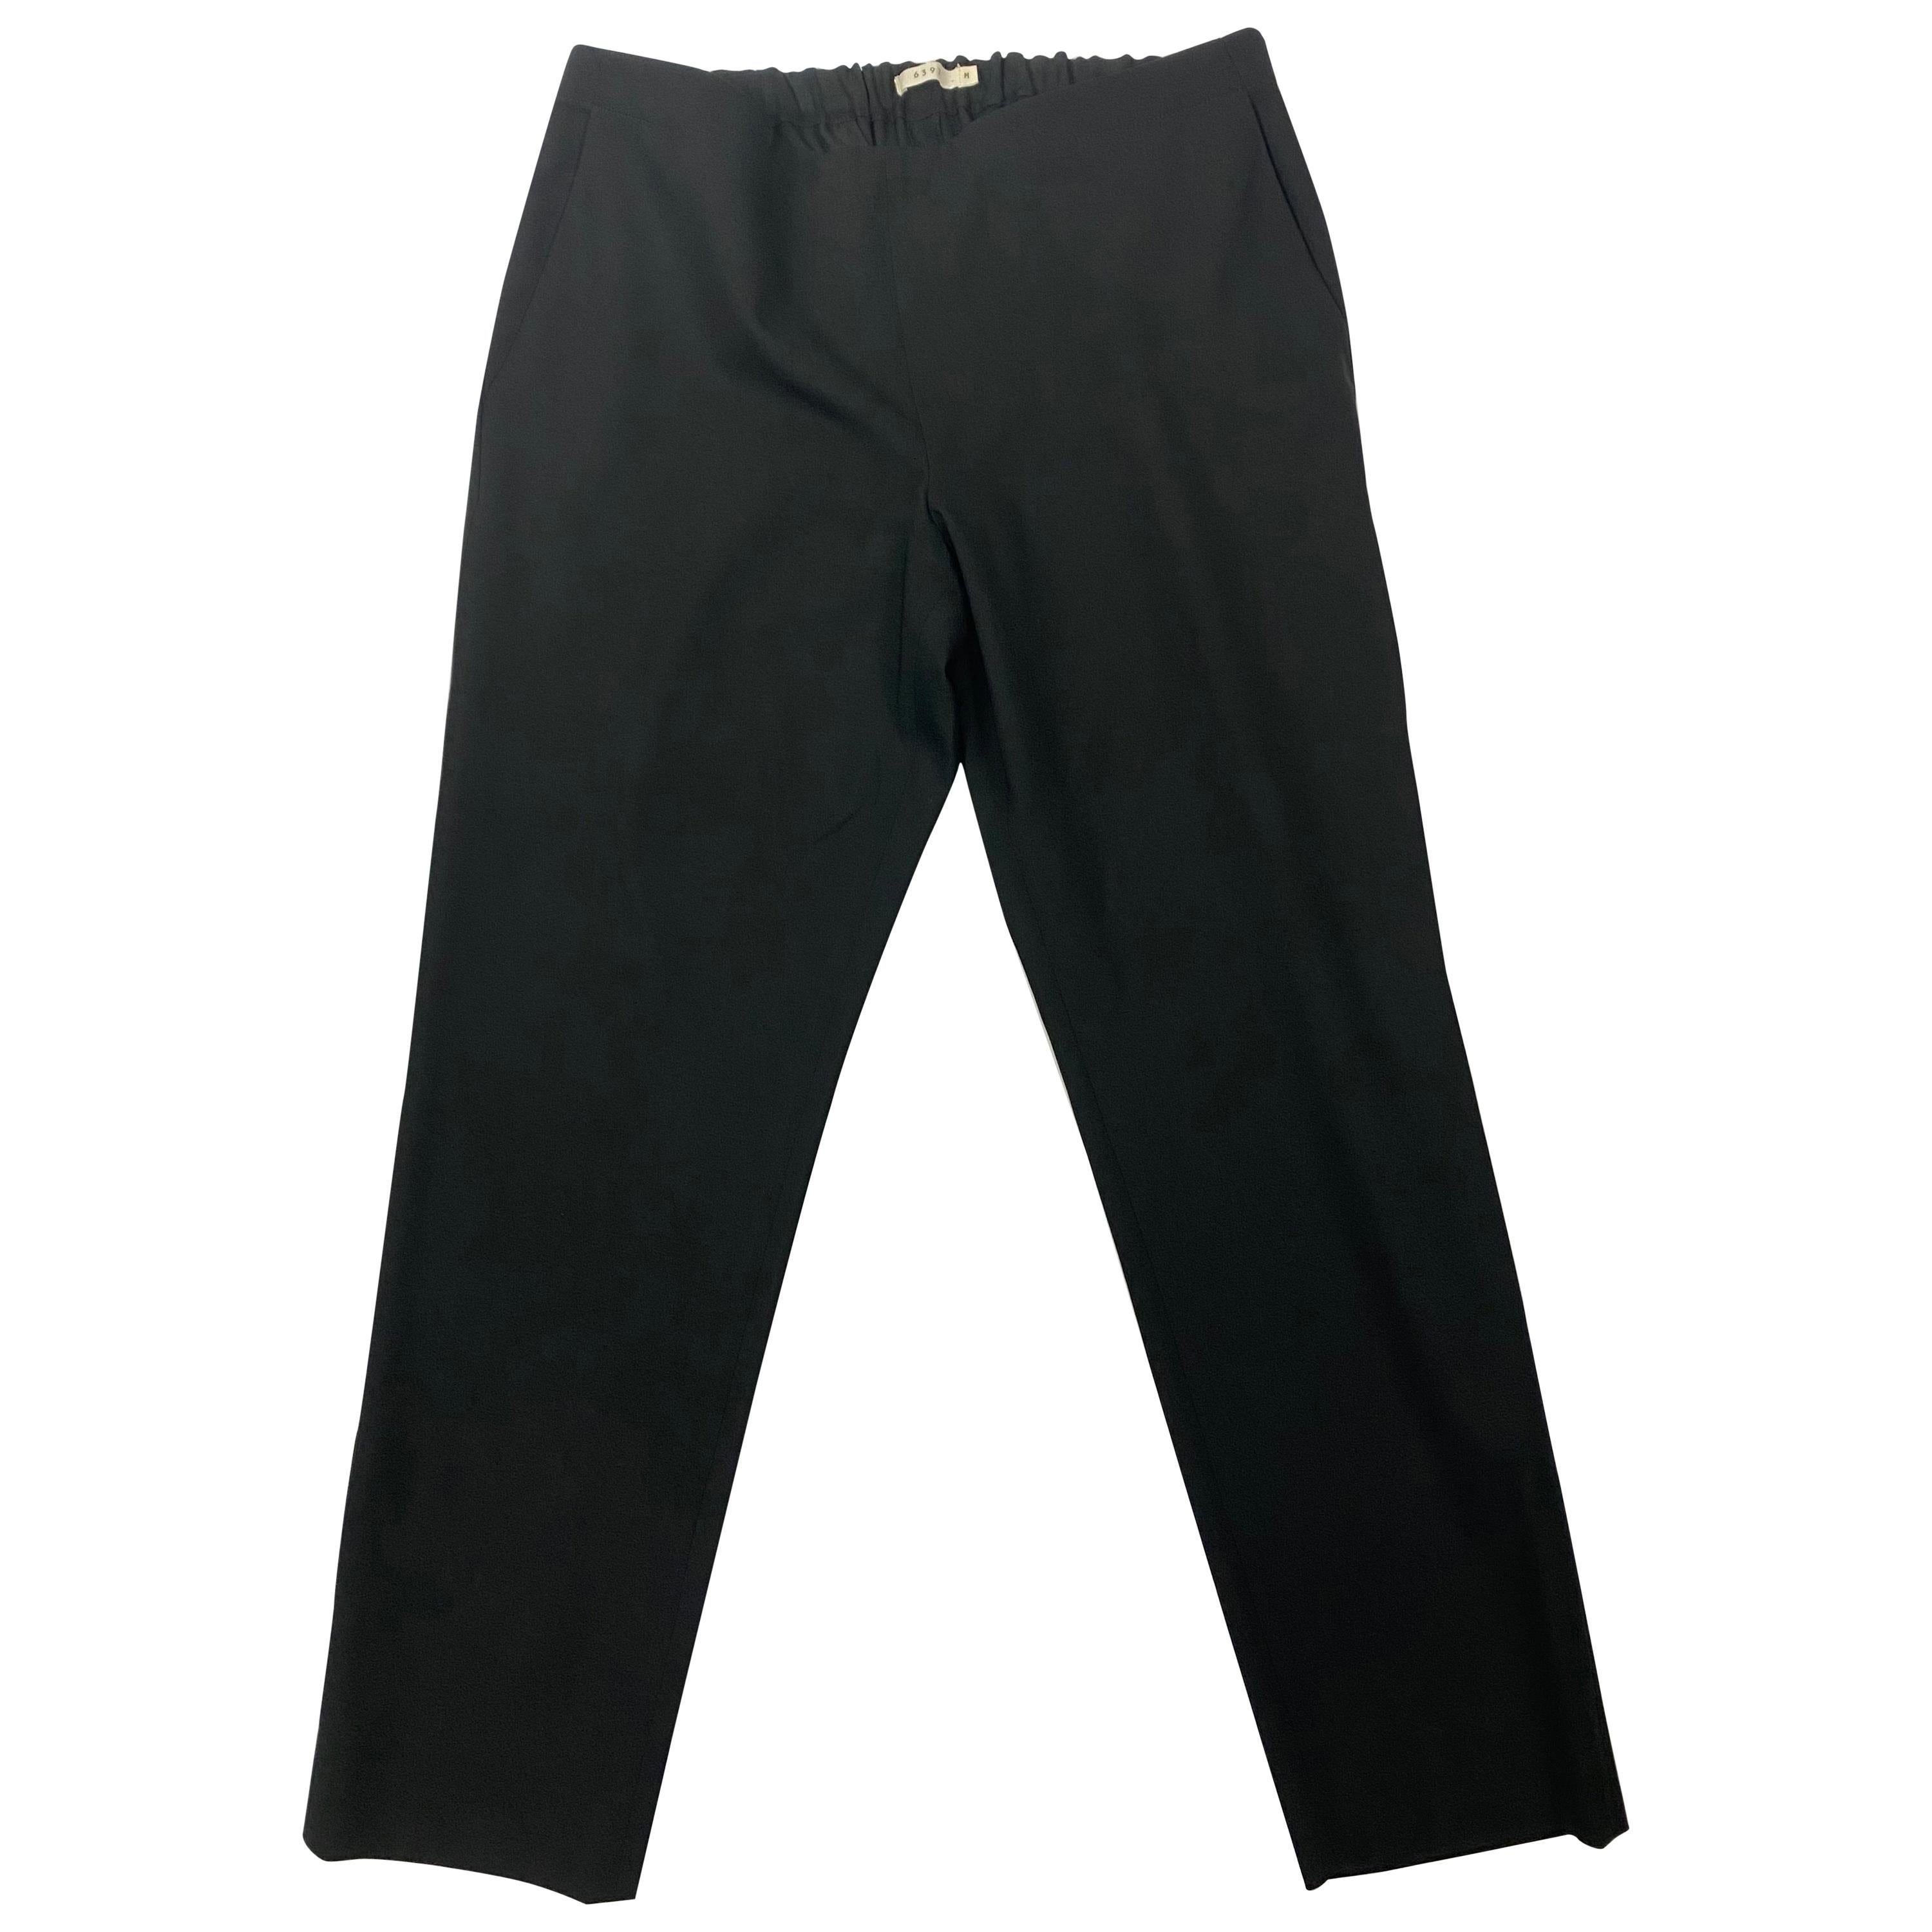 6397 Black Wool Trousers Pants, Size Medium For Sale